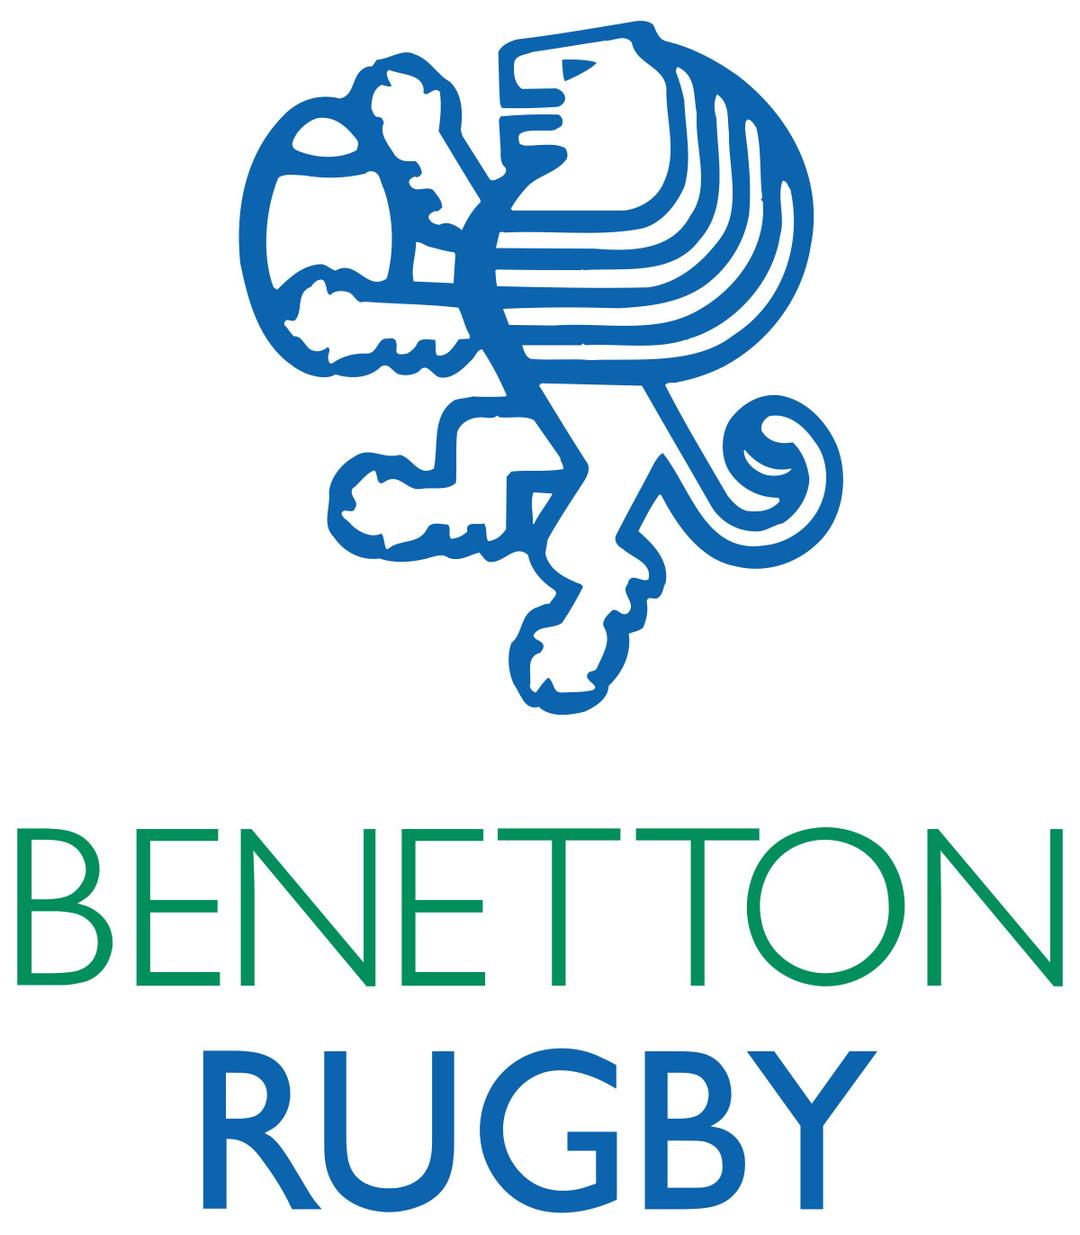 Benetton Rugby Logo png transparent